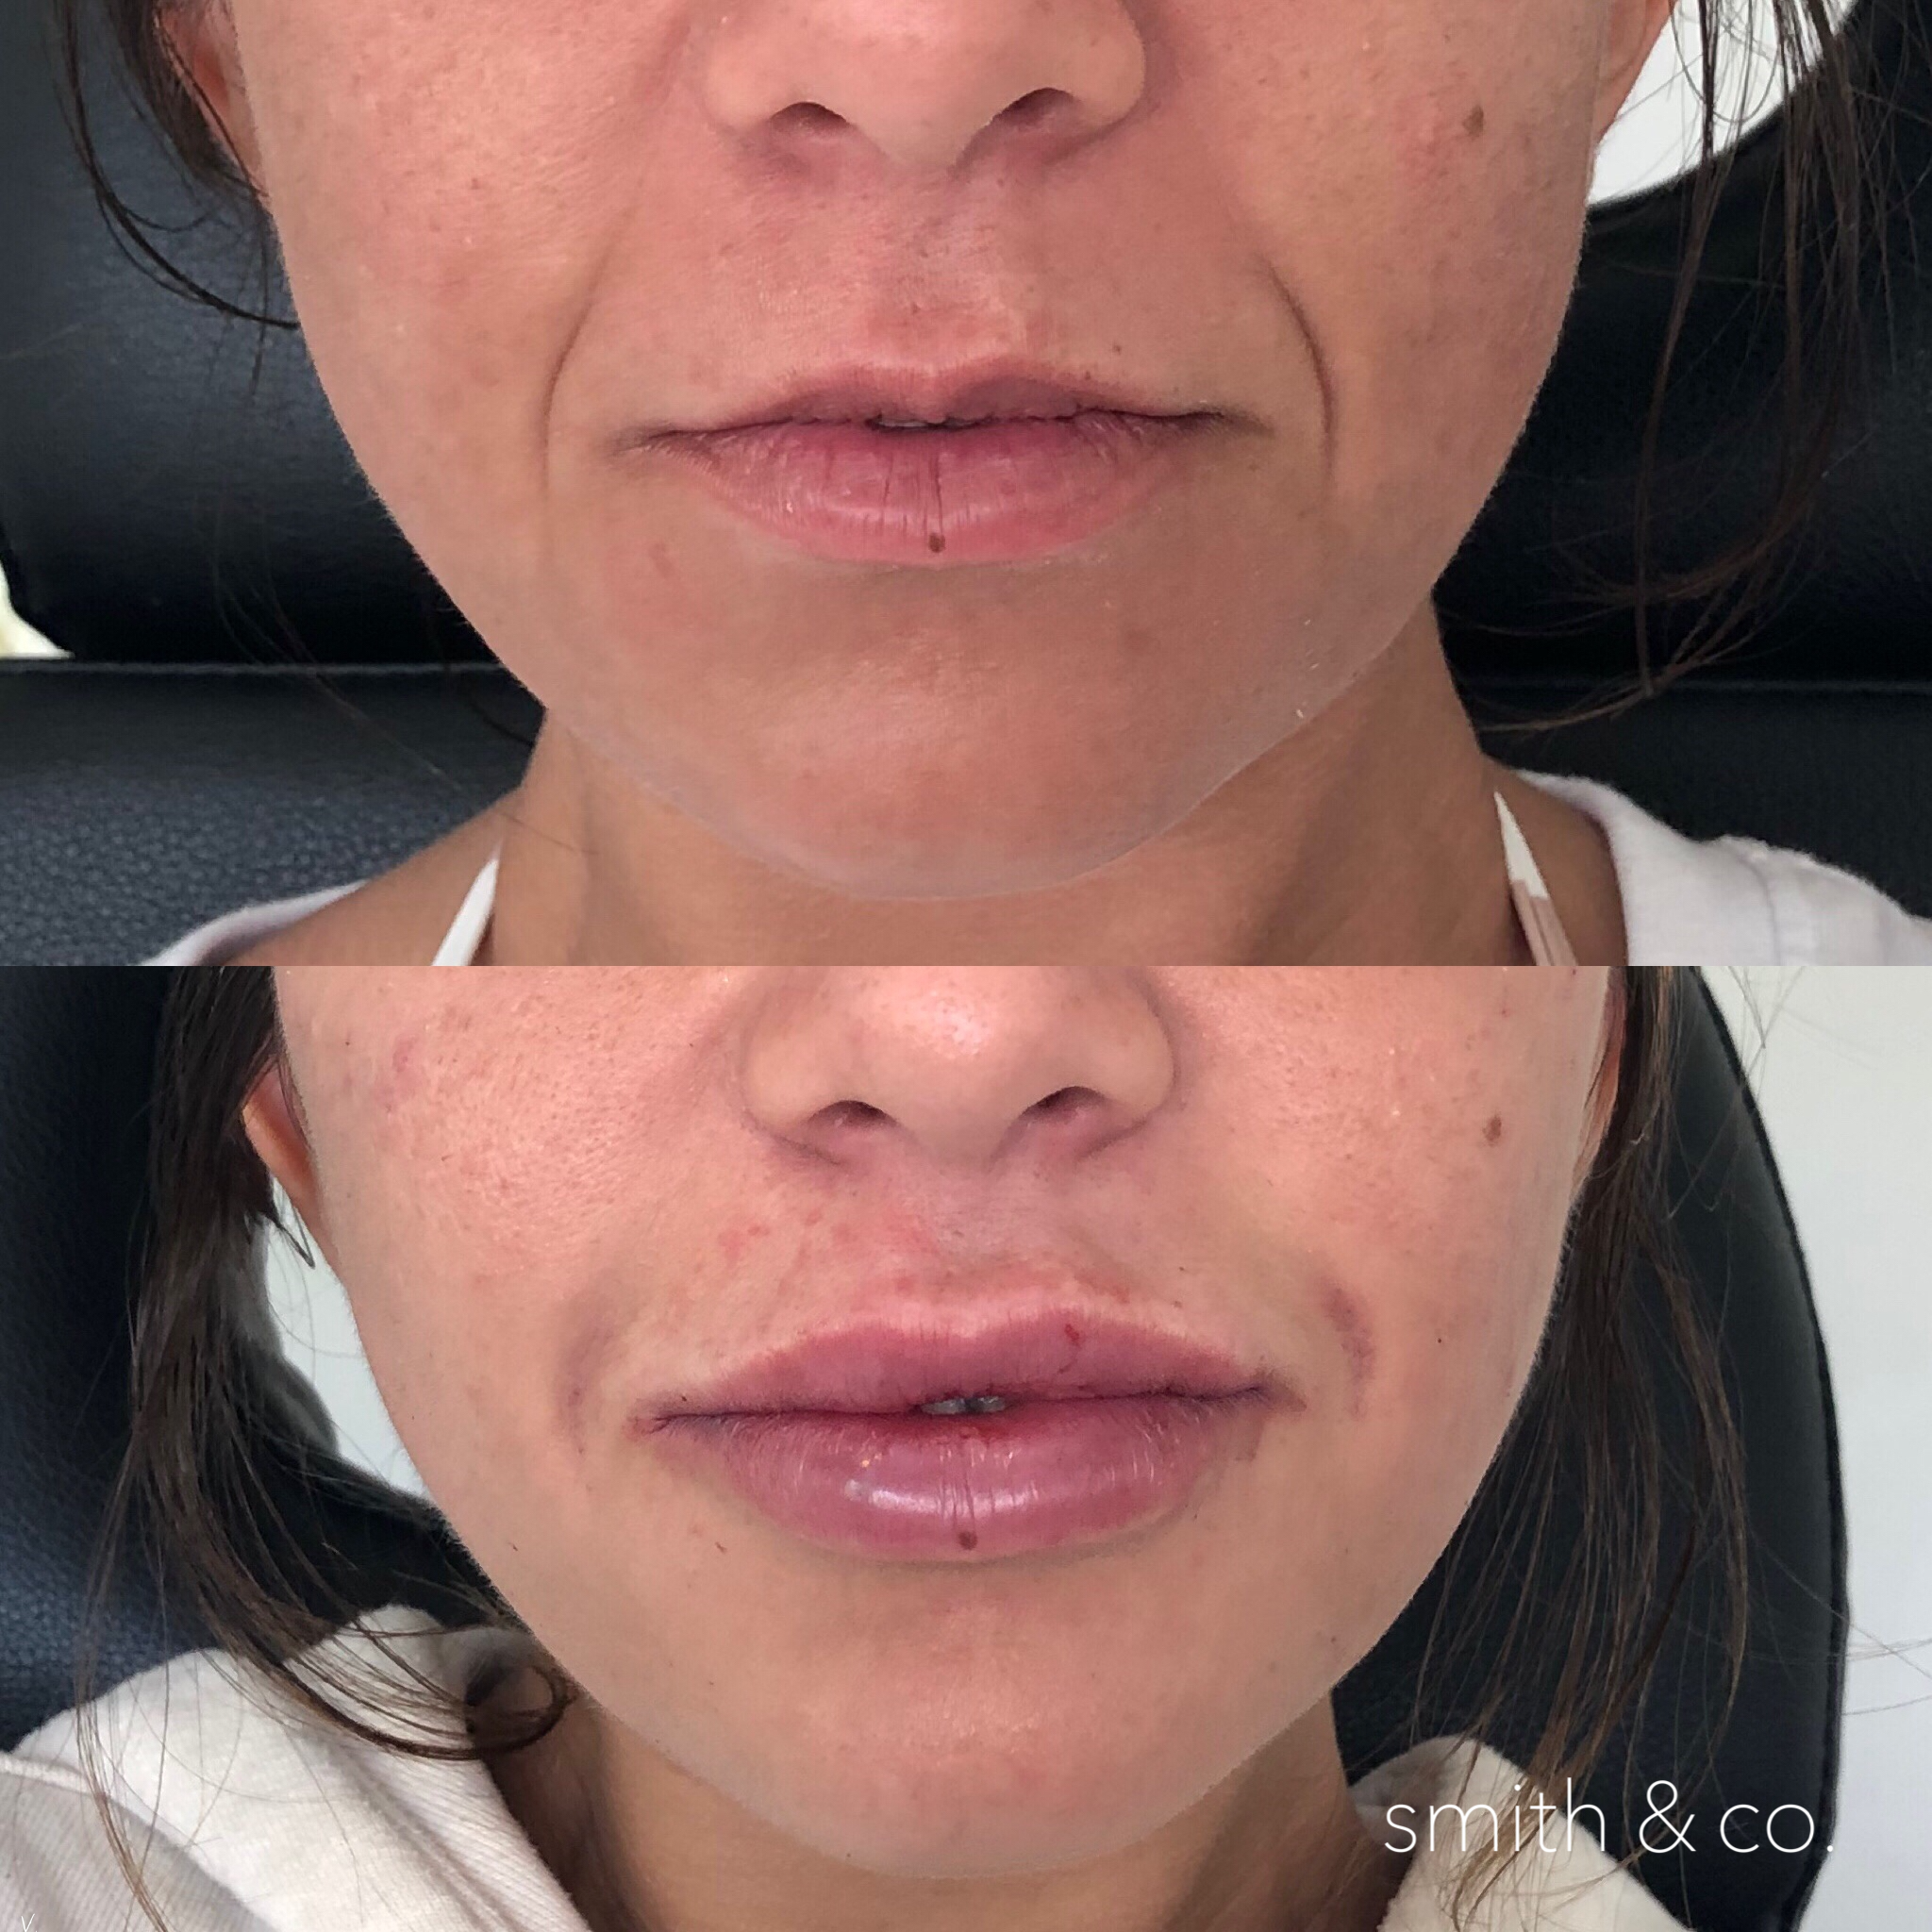 smith & co best lip injections in miami best botox specialist smile lines with restylane.PNG